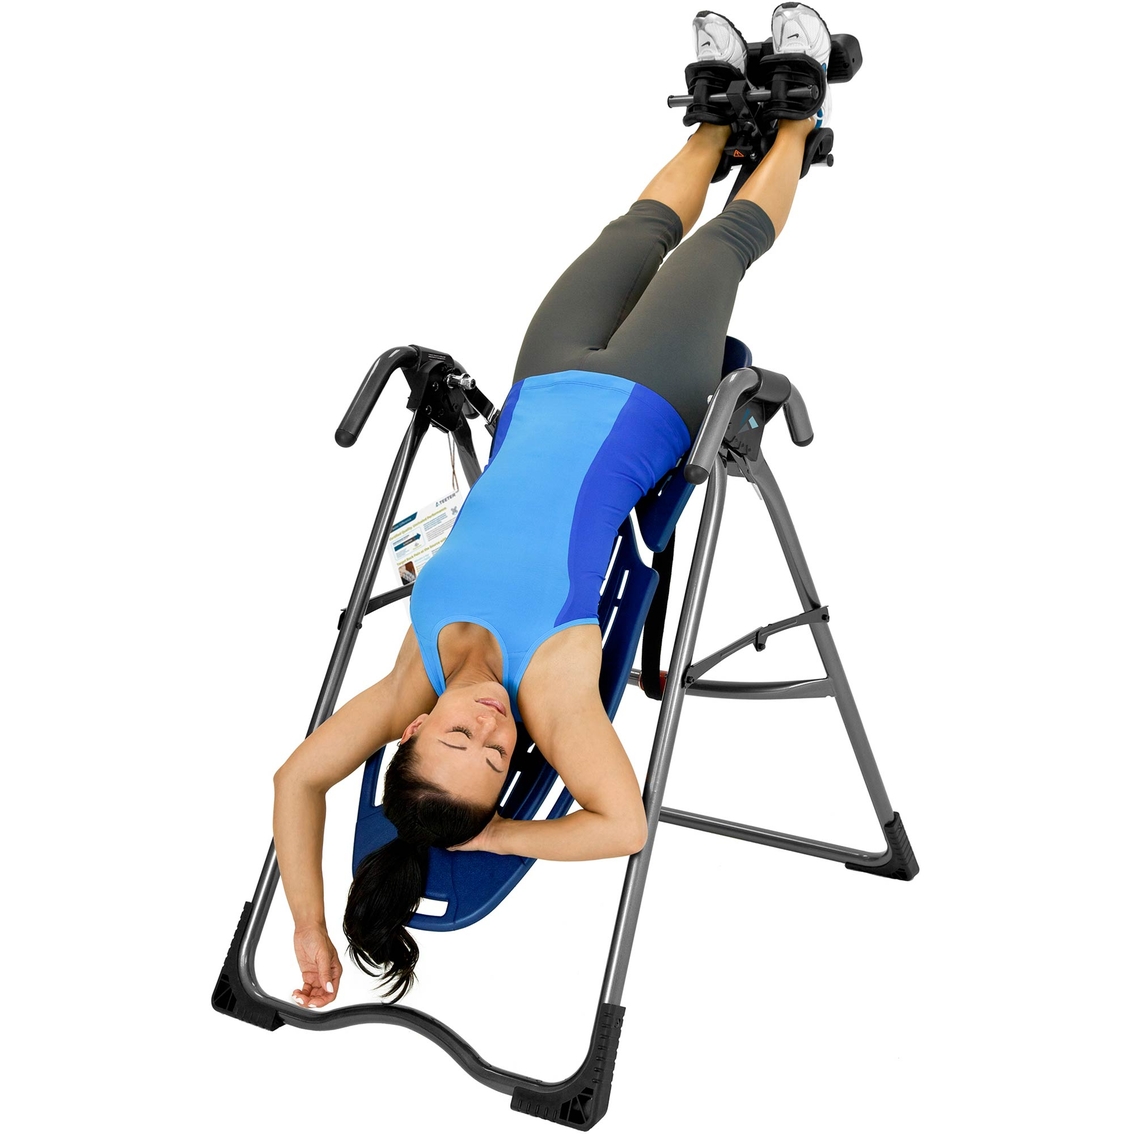 Teeter EP-560 Ltd. Inversion Table with Back Pain Relief DVD - Image 2 of 2